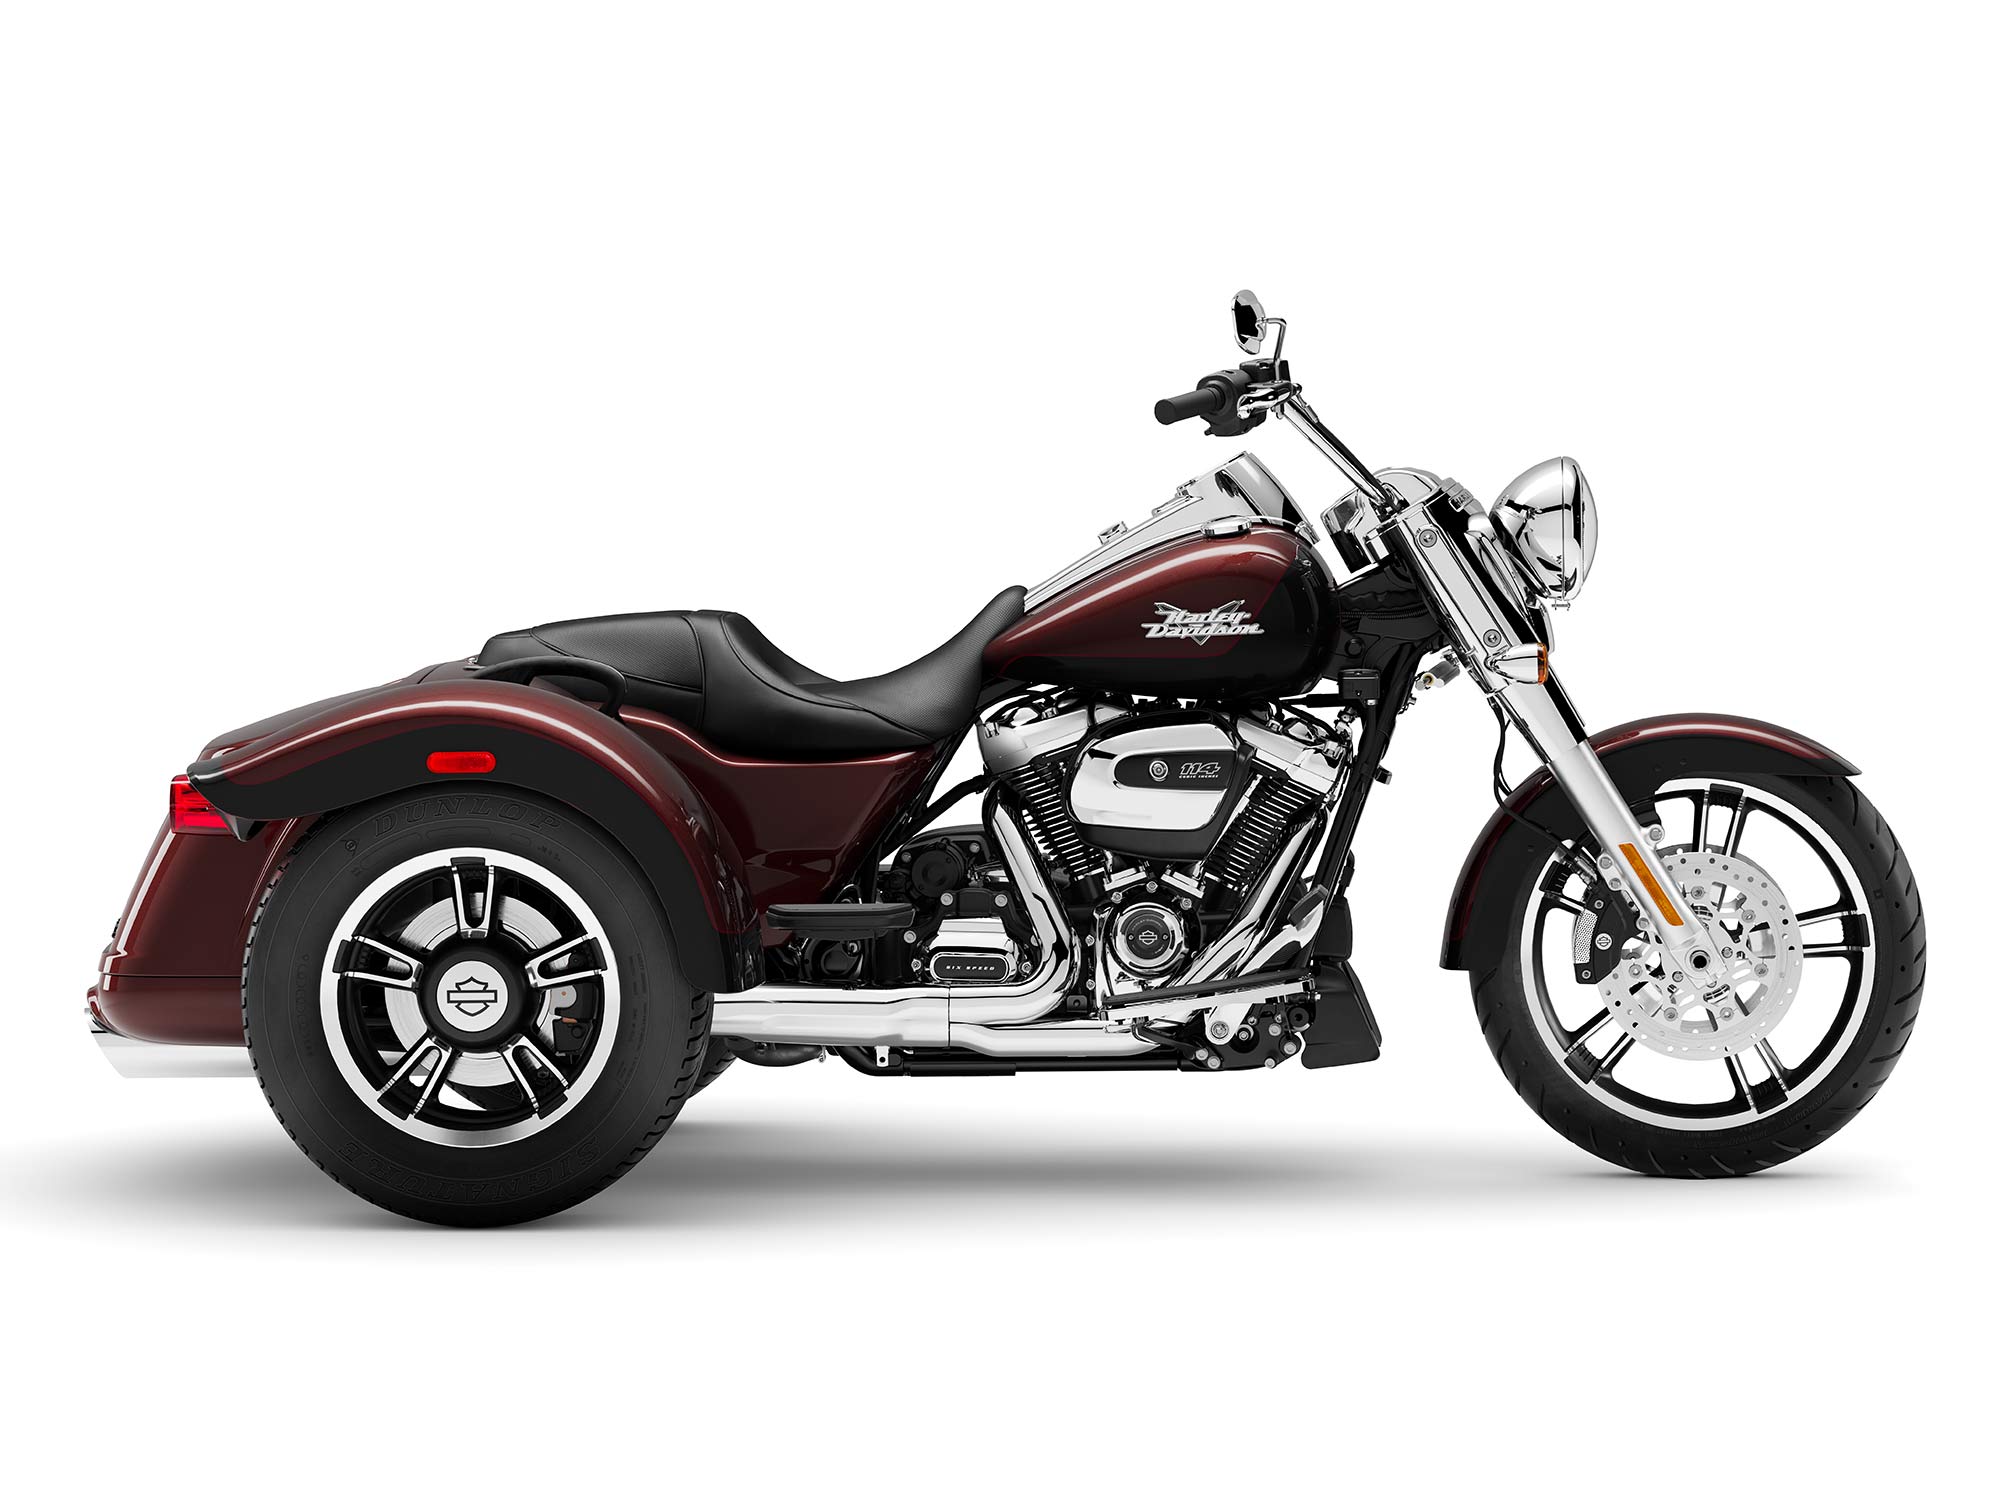 5 reasons why the Harley-Davidson Sportster 883 is worth your hard-earned  cash